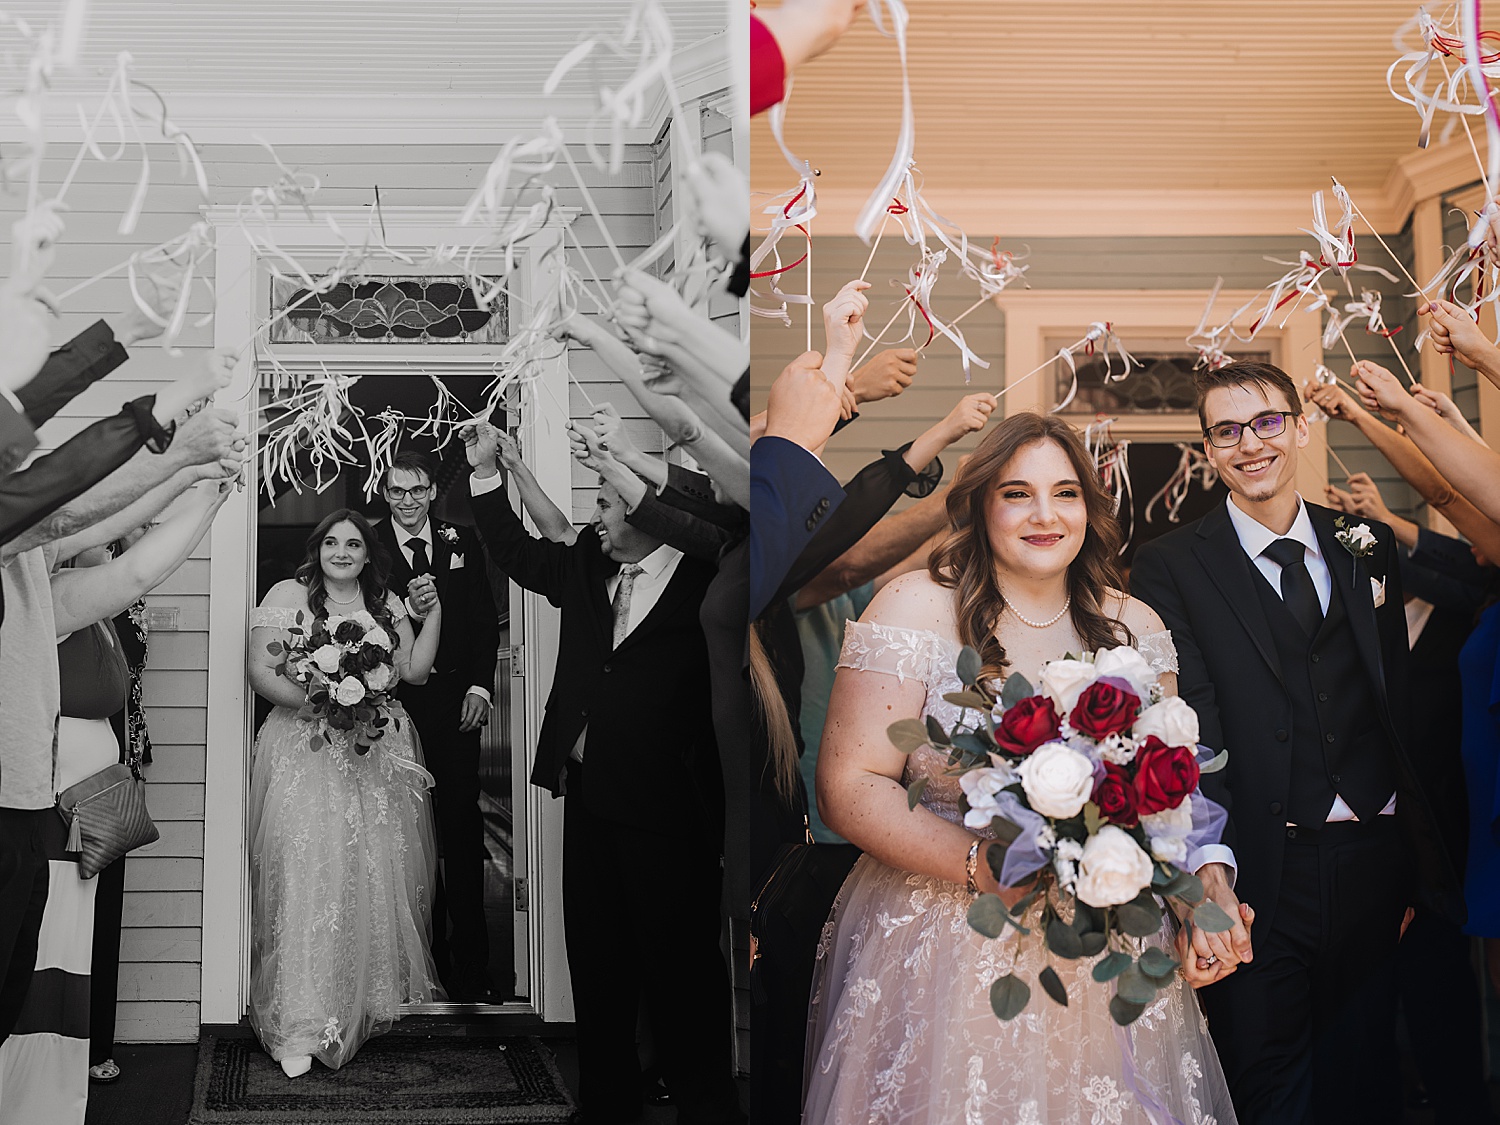 Newly married couple have streamer exit after wedding ceremony at historic House intimate wedding